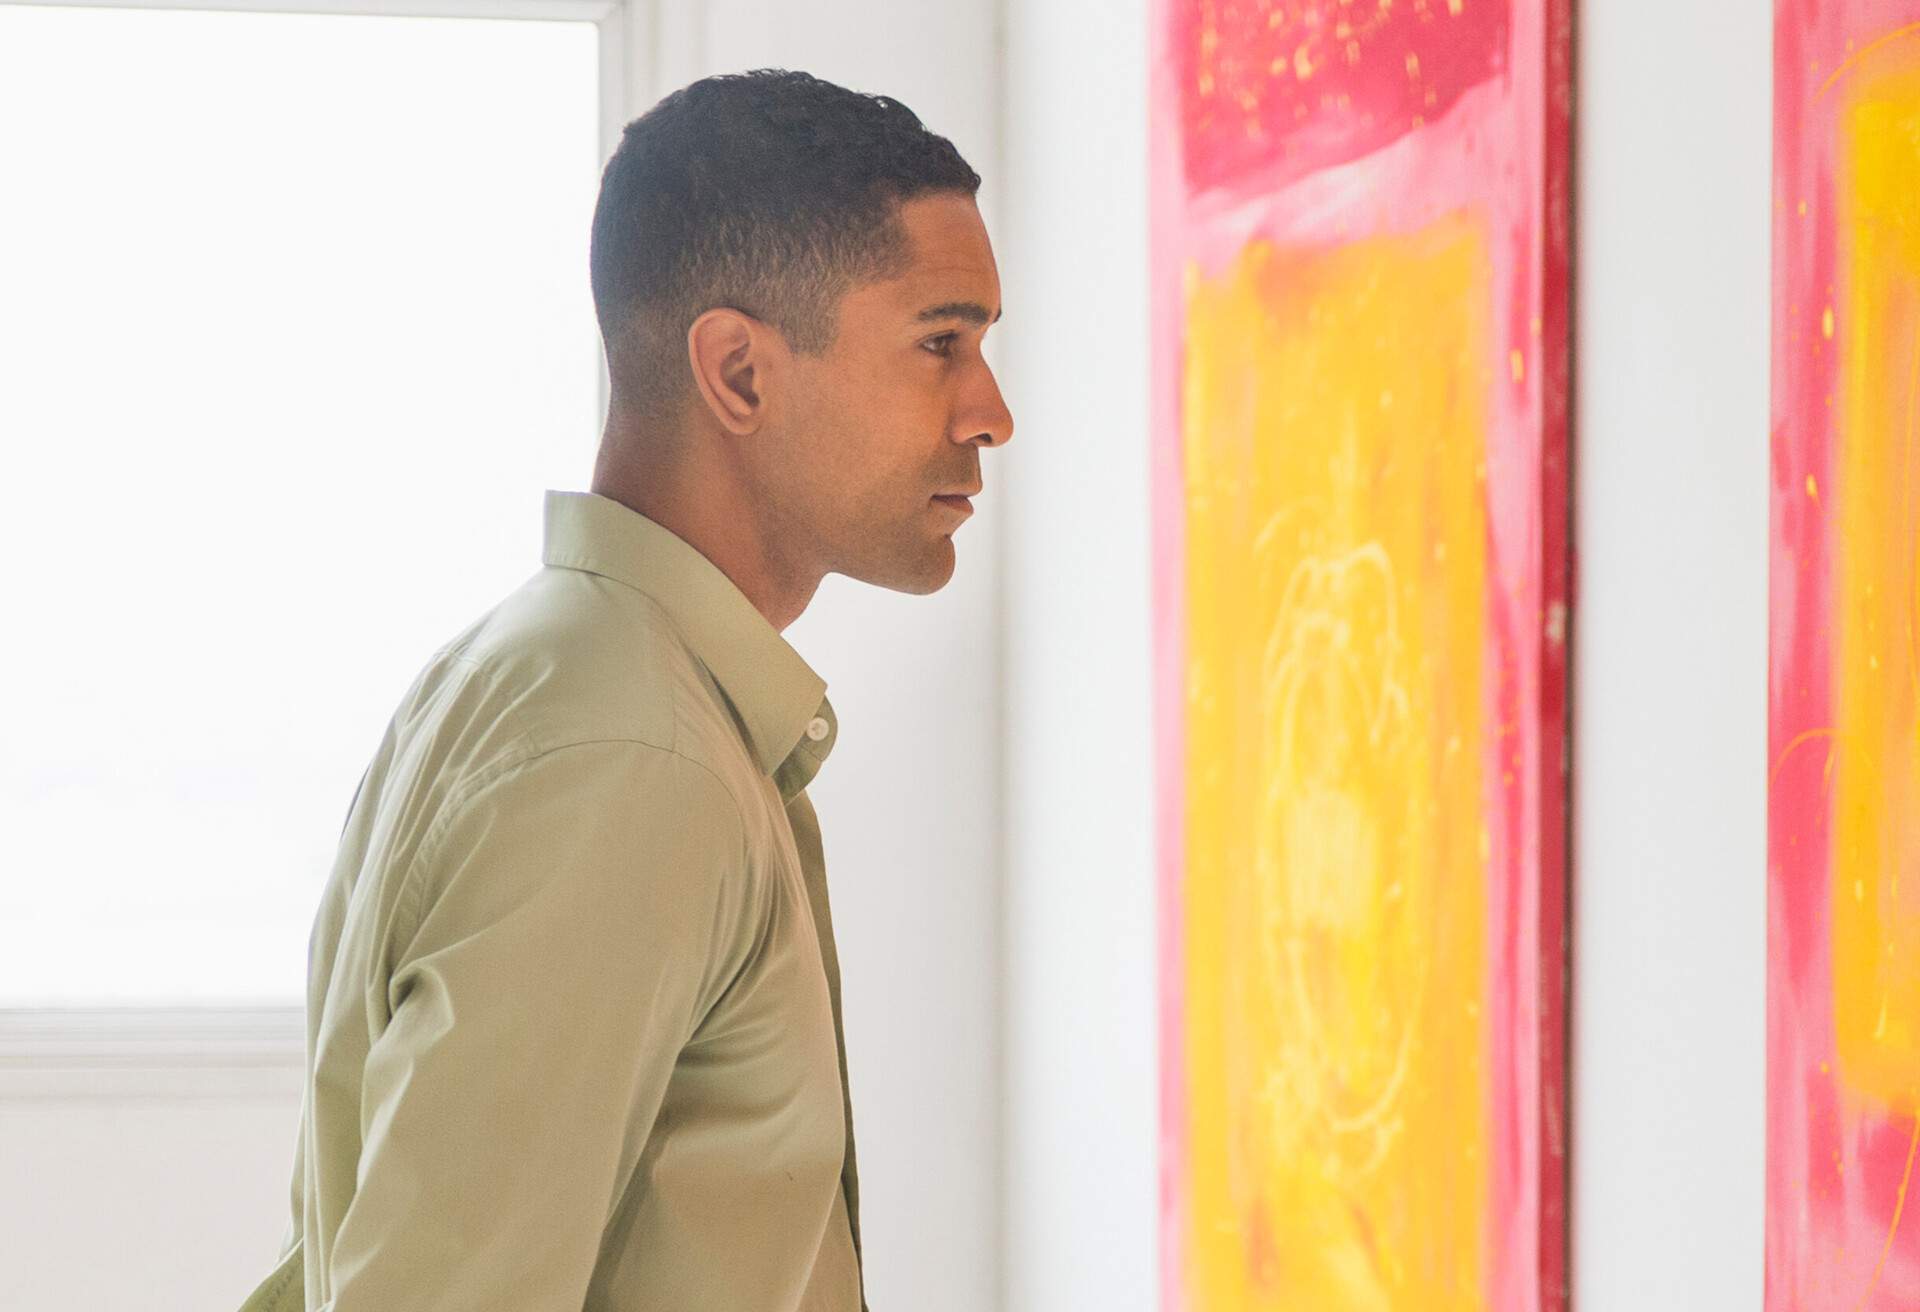 A man in a long-sleeve shirt stares at an abstract art on the wall.